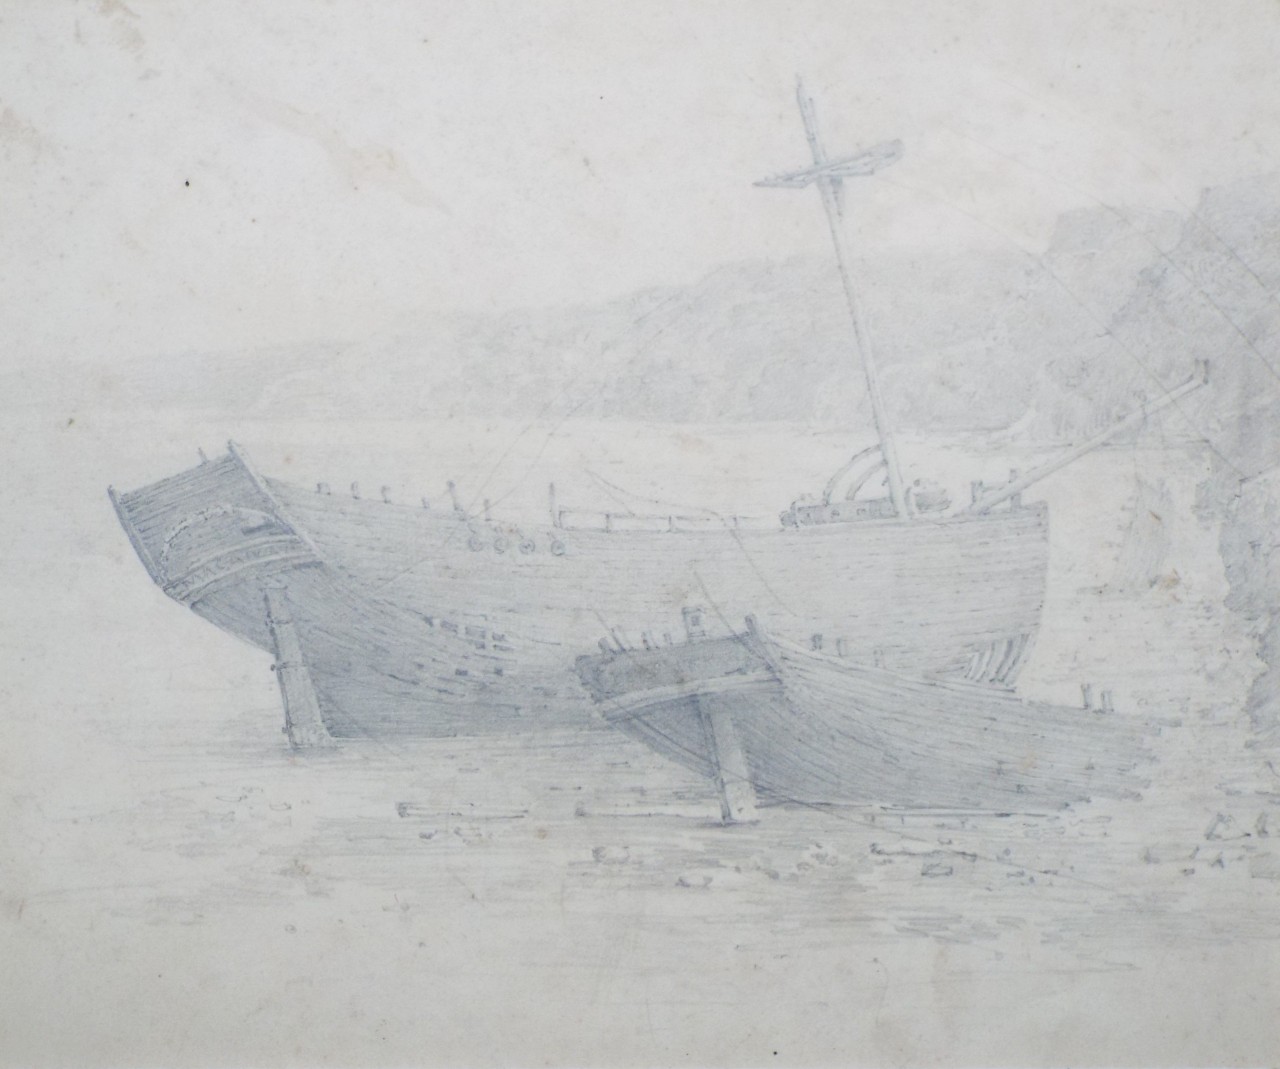 Pencil drawing - Two beached derelict sailing ships